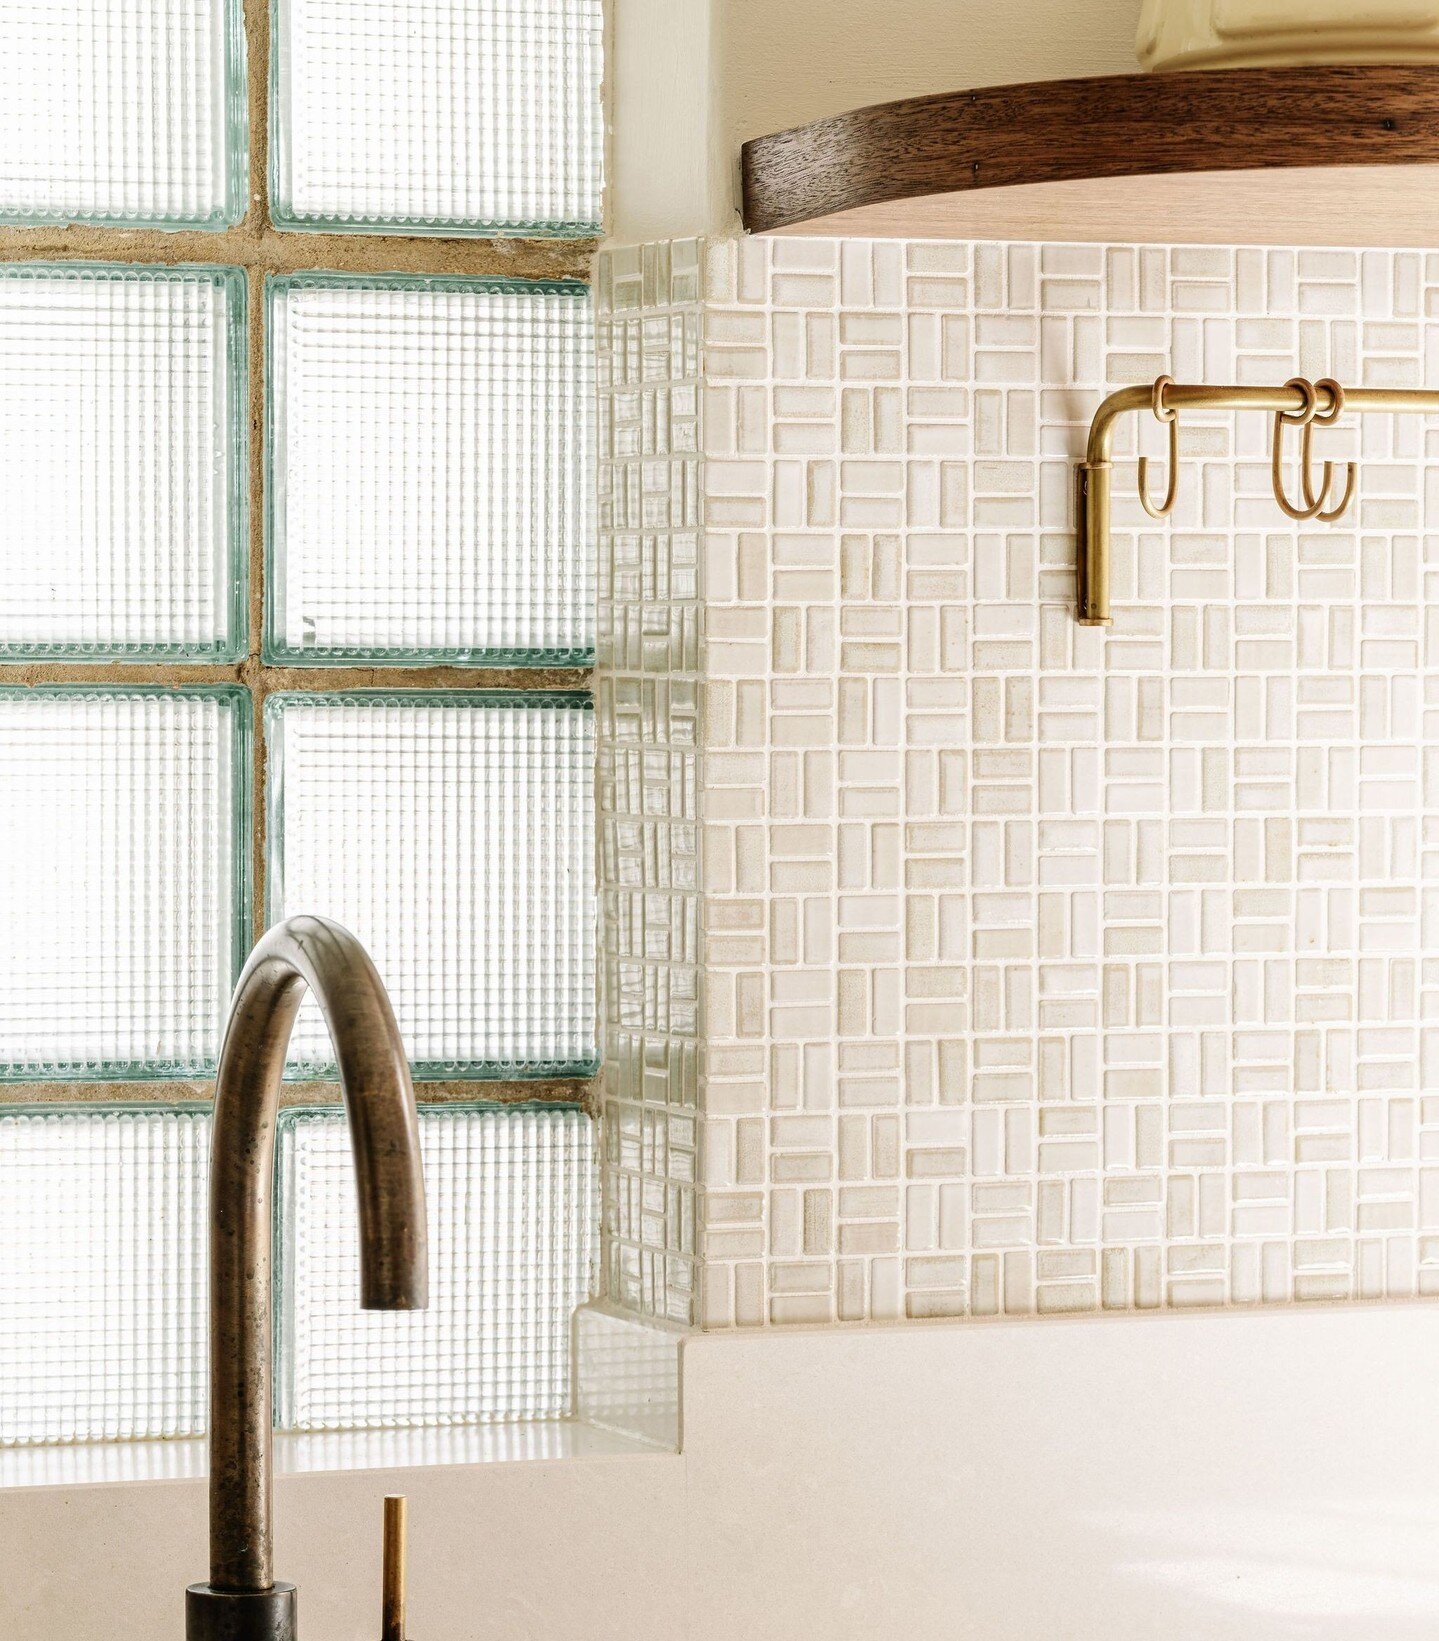 A little close-up of the materials we introduced to our 1938 kitchen. Choosing a tonal mosaic for the kitchen backsplash allowed us to tile into the deep window reveal provided by the solid masonry walls. ⁠
⁠
Paired with an antique brass Faucet Strom